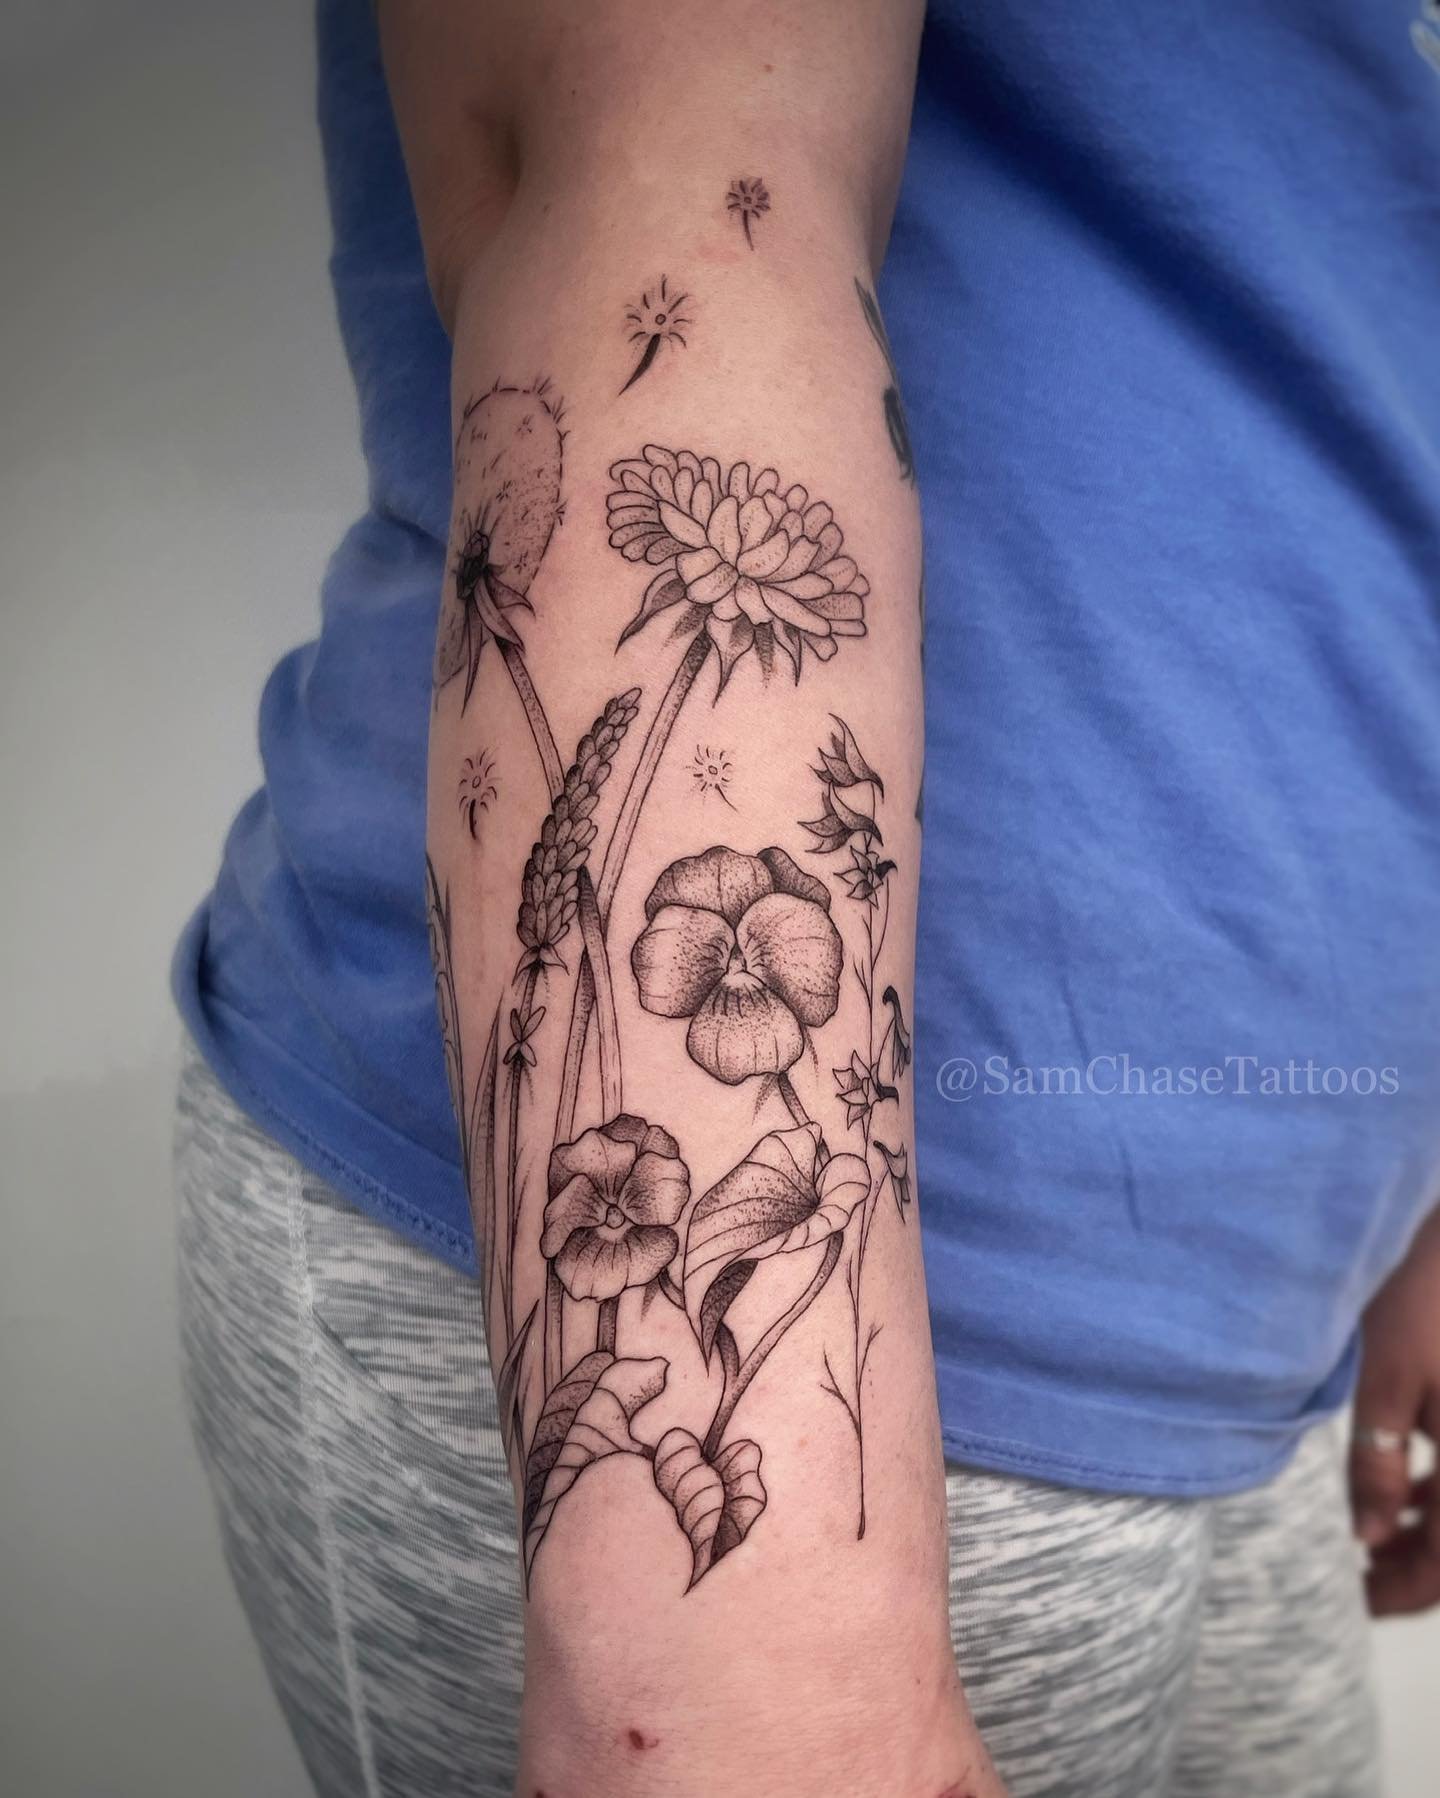 🌸WILDFLOWERS🌸 Had fun with this fineline floral bunch the other day! 🖤 Heavily based off a drawing provided by the client (swipe to see)
.
.
.
.
#wildflowers #floraltattoo #finelinetattoo #dotwork #customart #chicagotattooers #womensupportingwomen